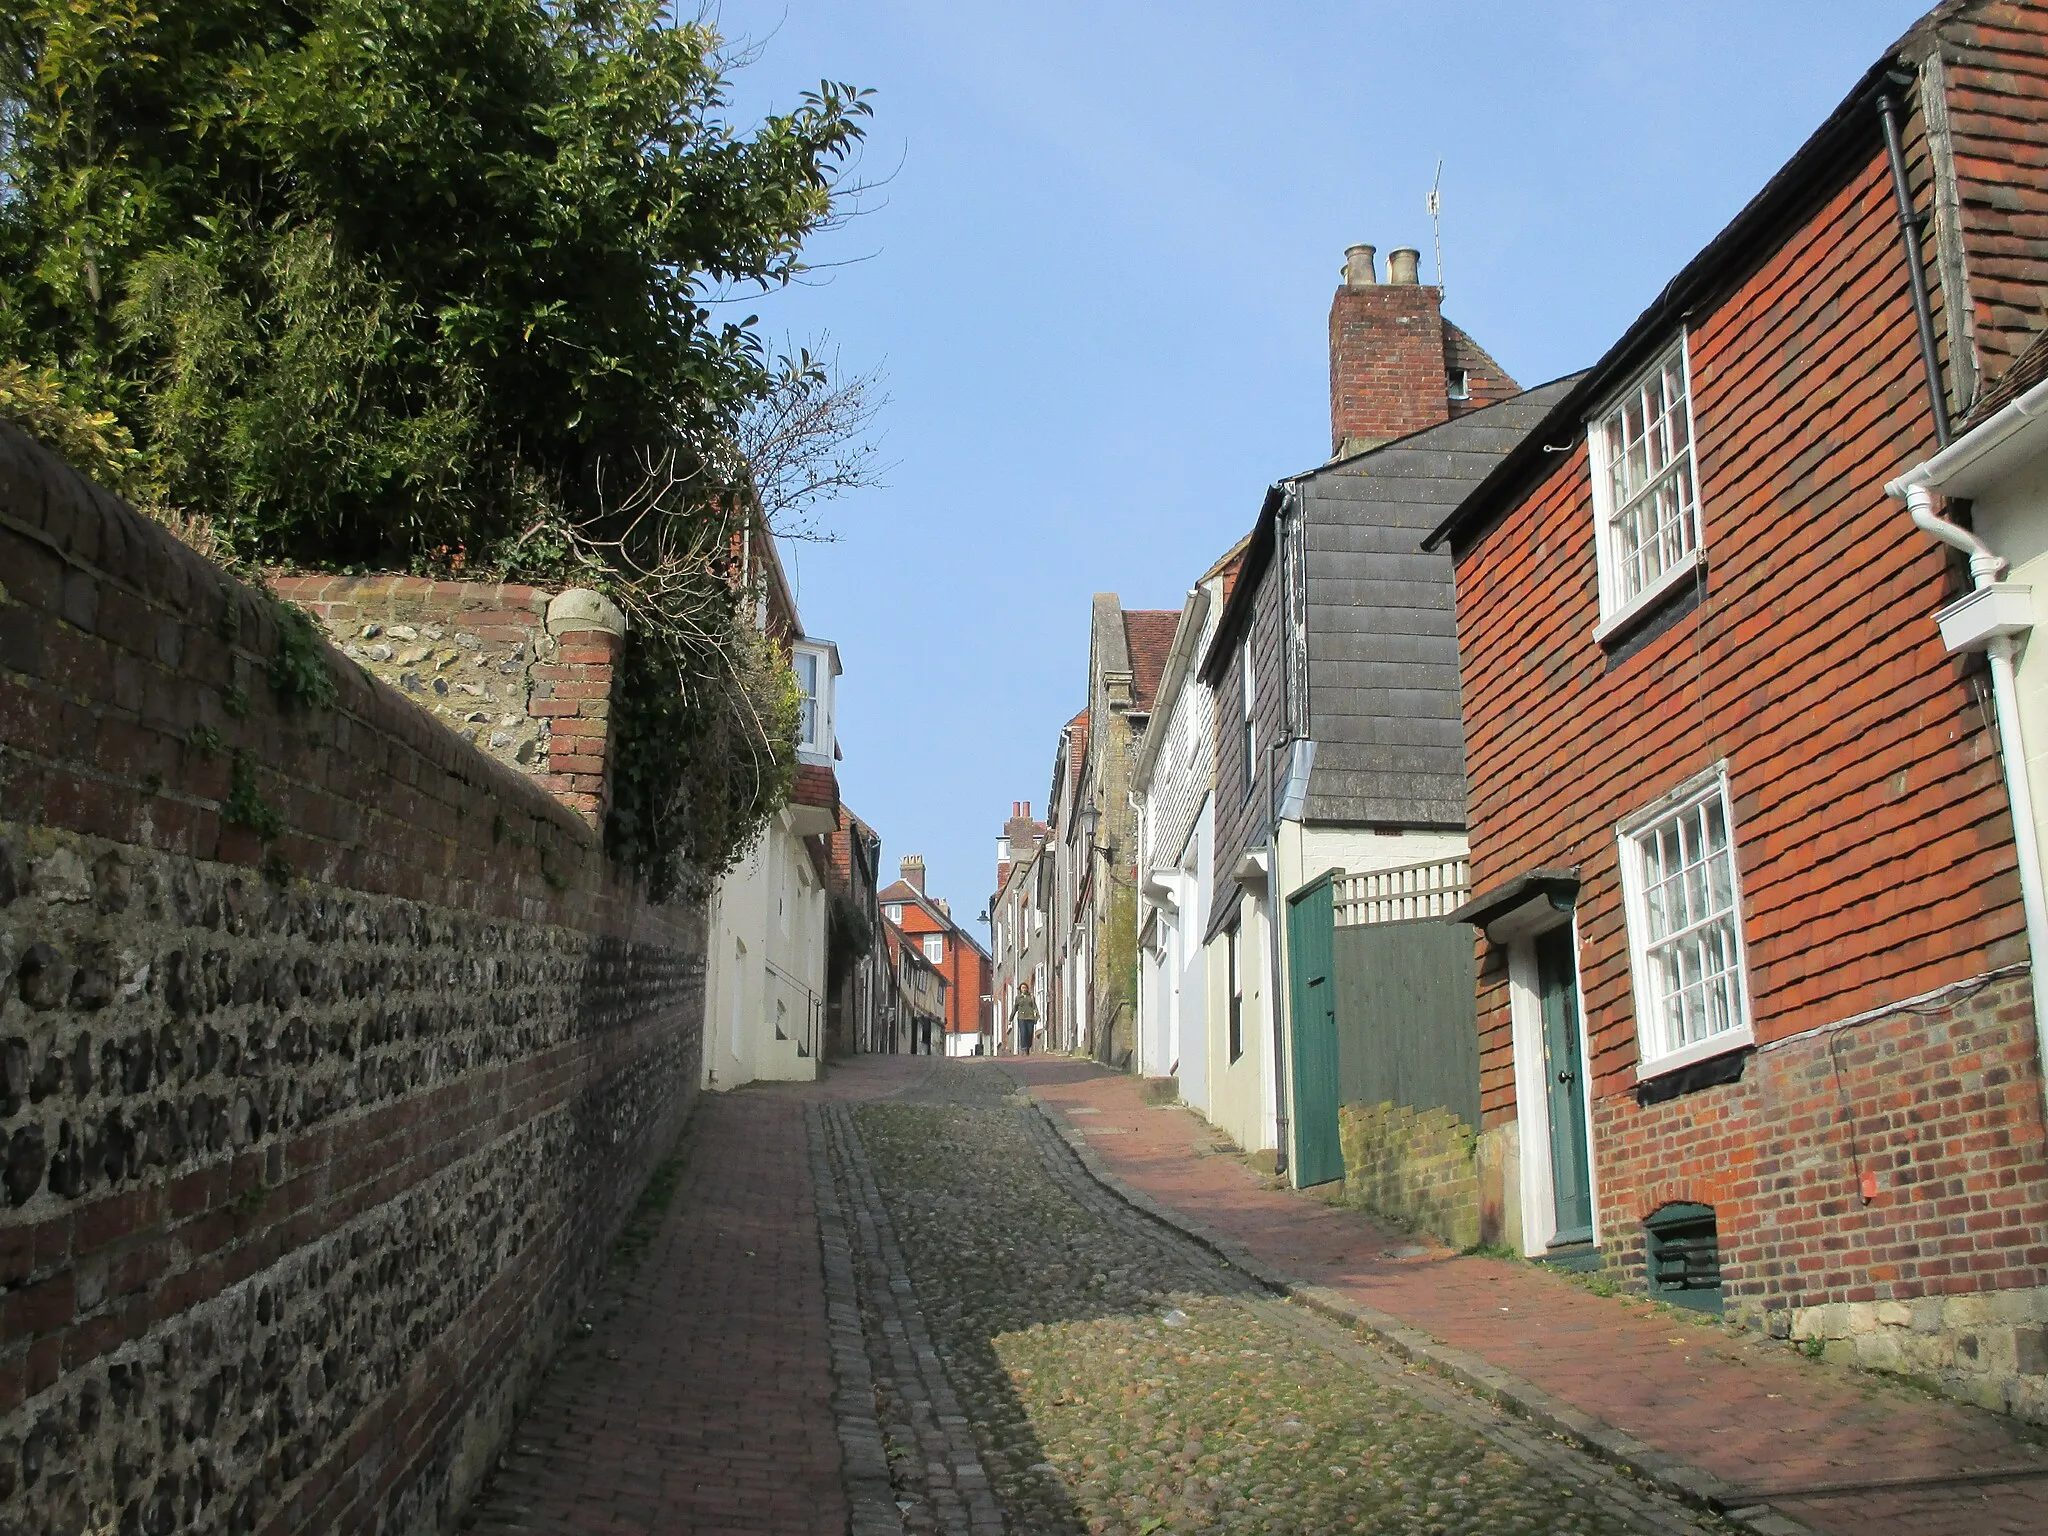 Photo showing: Keere Street, Lewes, East Sussex, photographed from the south-east